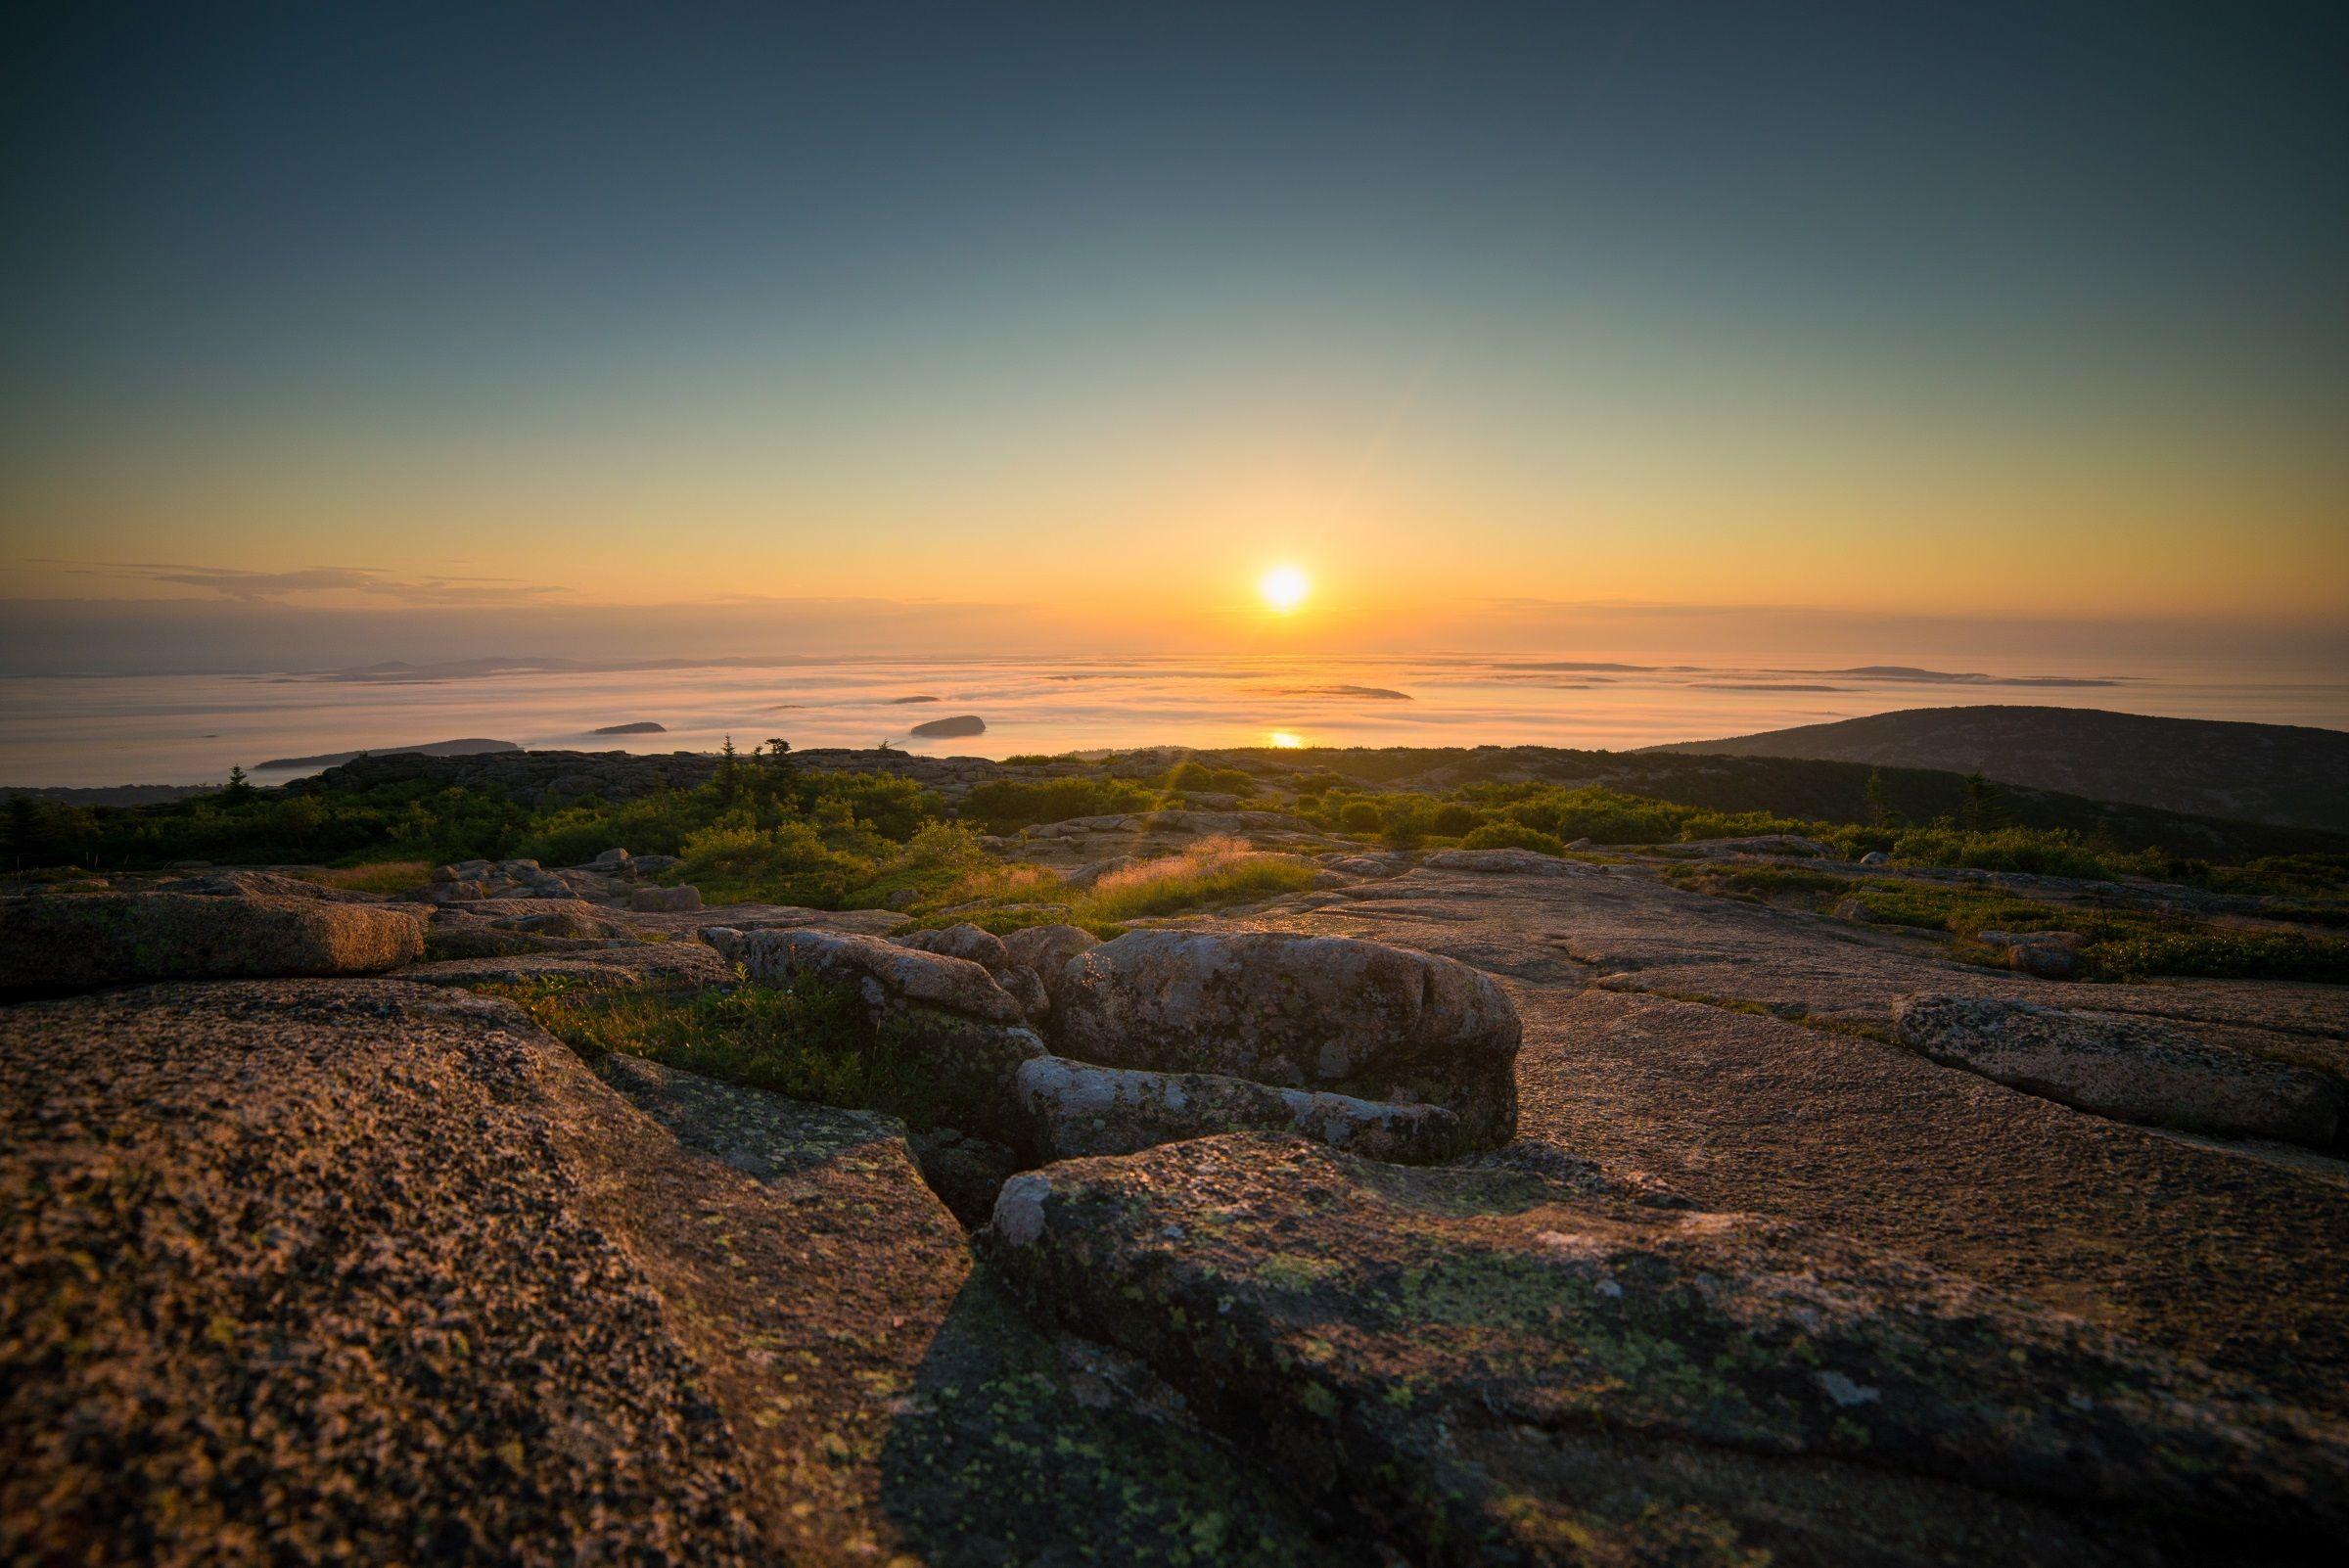 Cadillac Mountain is located on Mount Desert Island, within Acadia